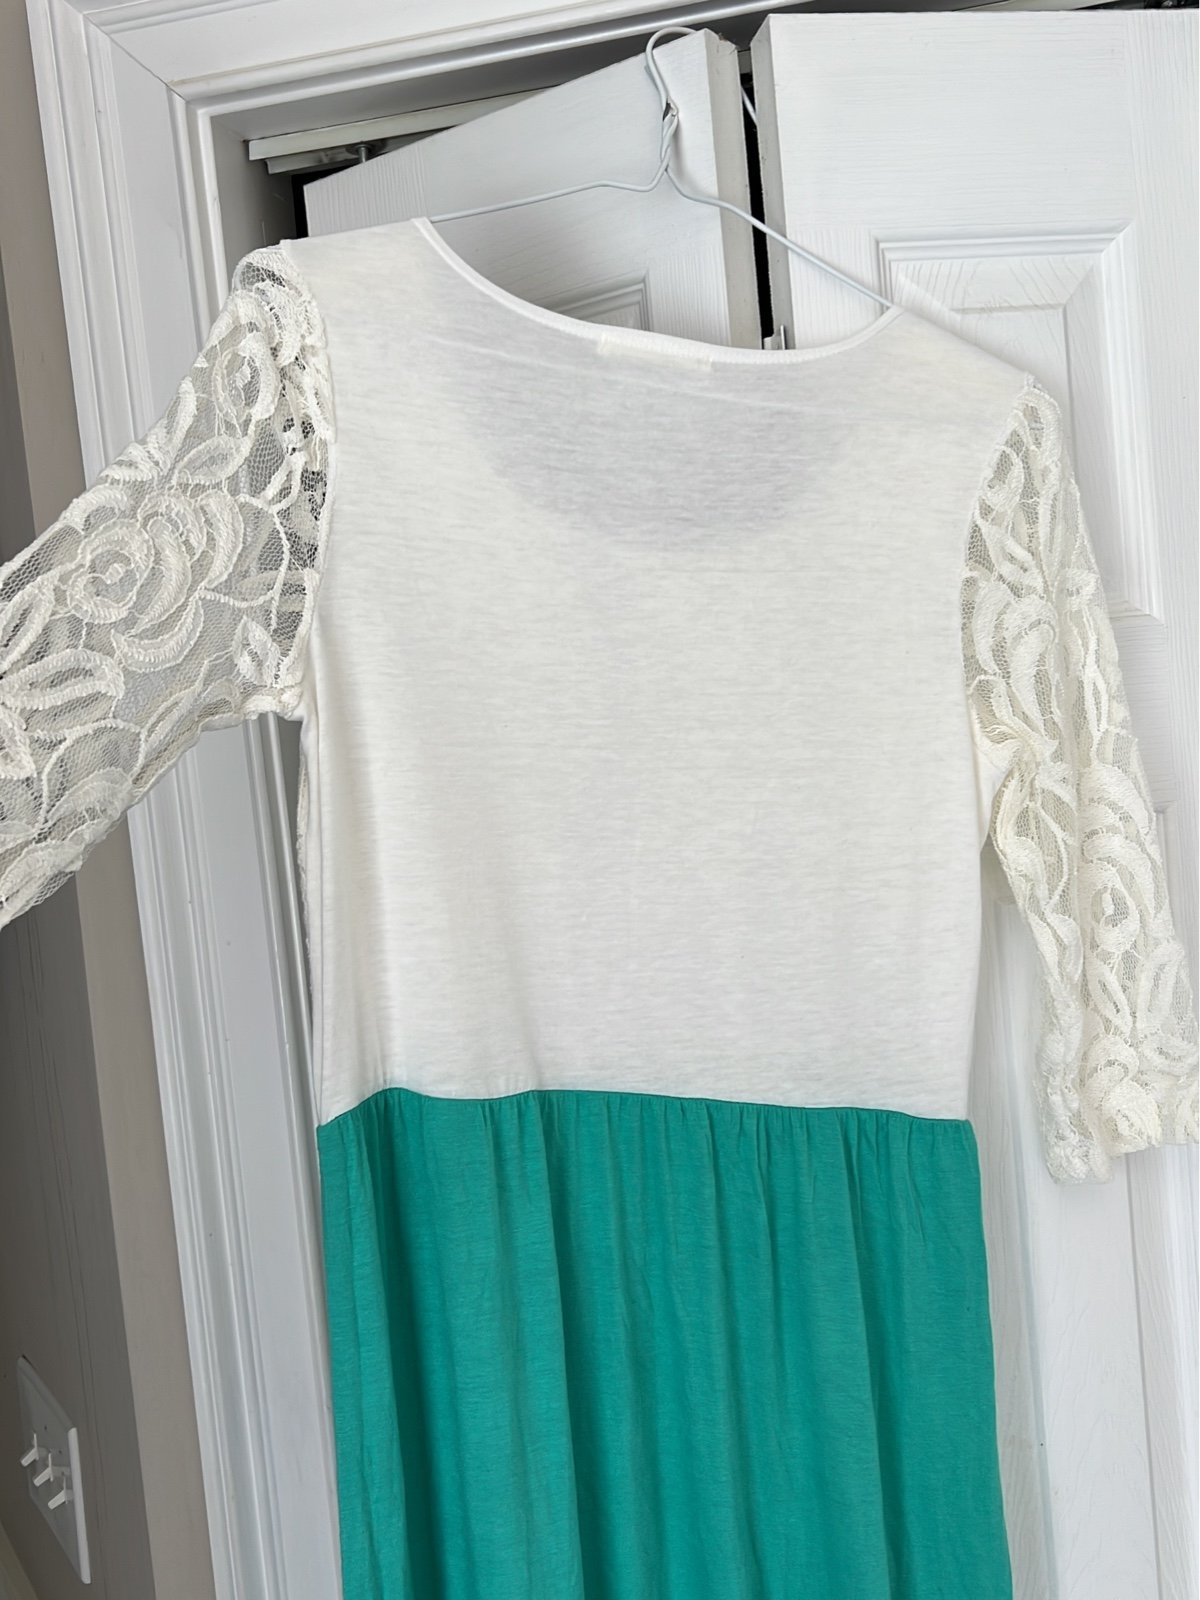 Gorgeous Ivory and Mint with Lace Maxi Dress - Medium aN62k8ypA